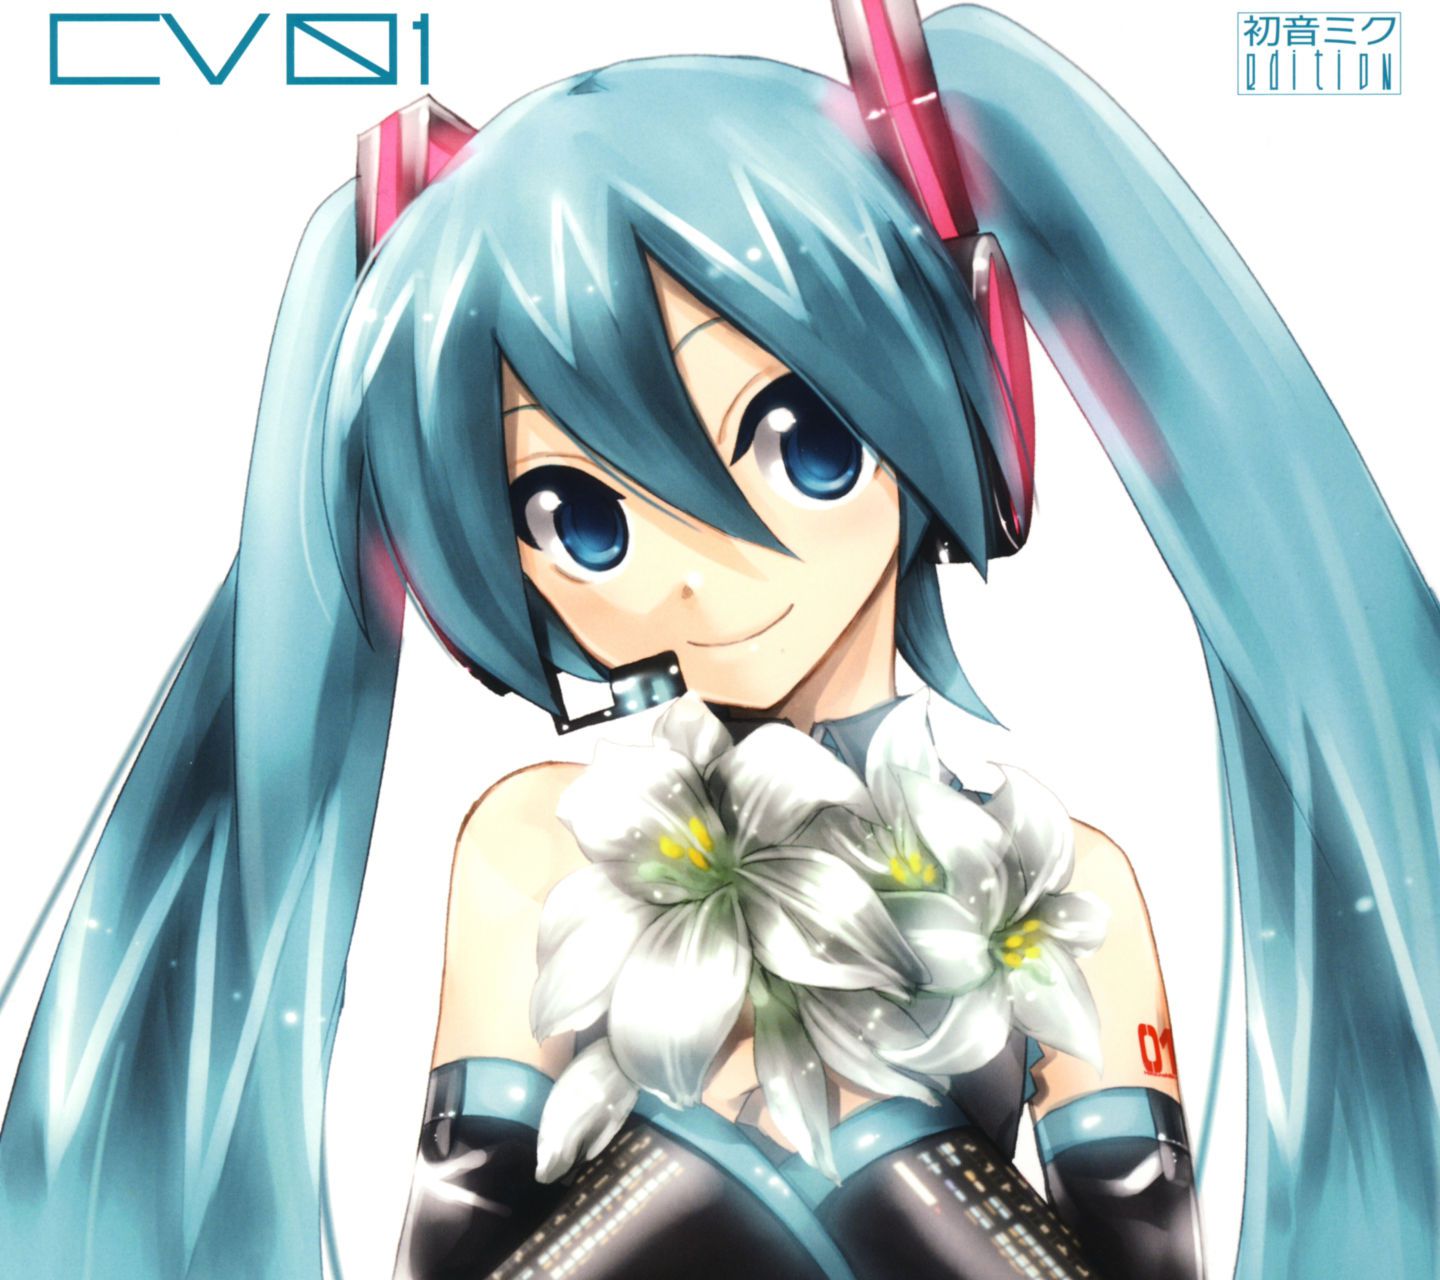 Vocaloid Android壁紙 1 初音ミク アニメ壁紙ネット Pc Android